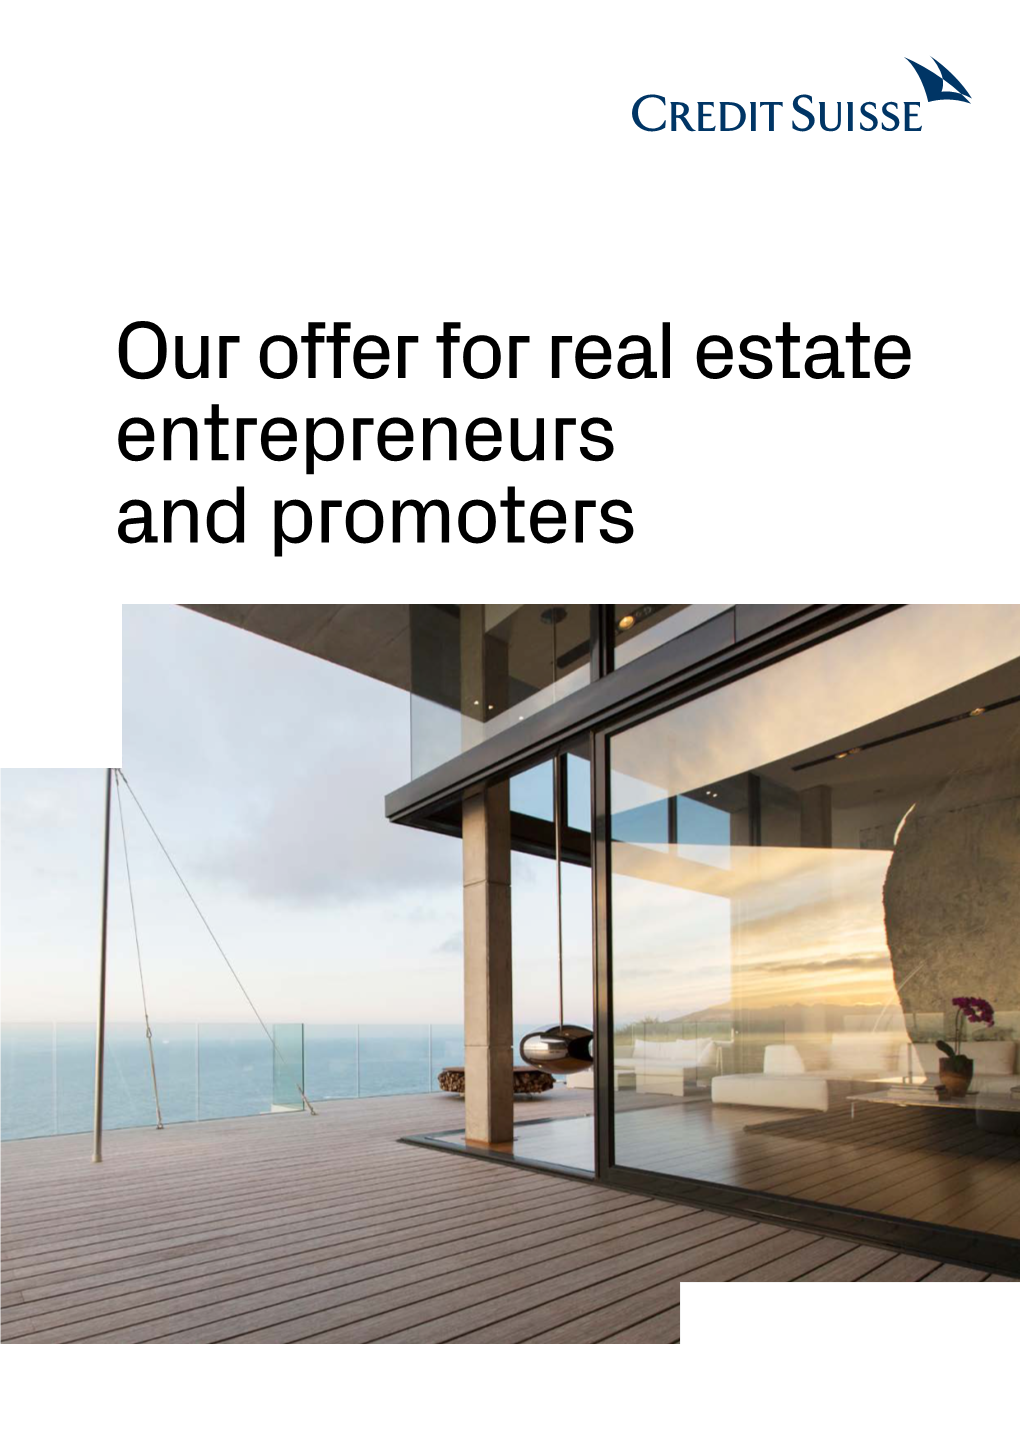 Our Offer for Real Estate Entrepreneurs and Promoters Credit Suisse – the Bank for Entrepreneurs